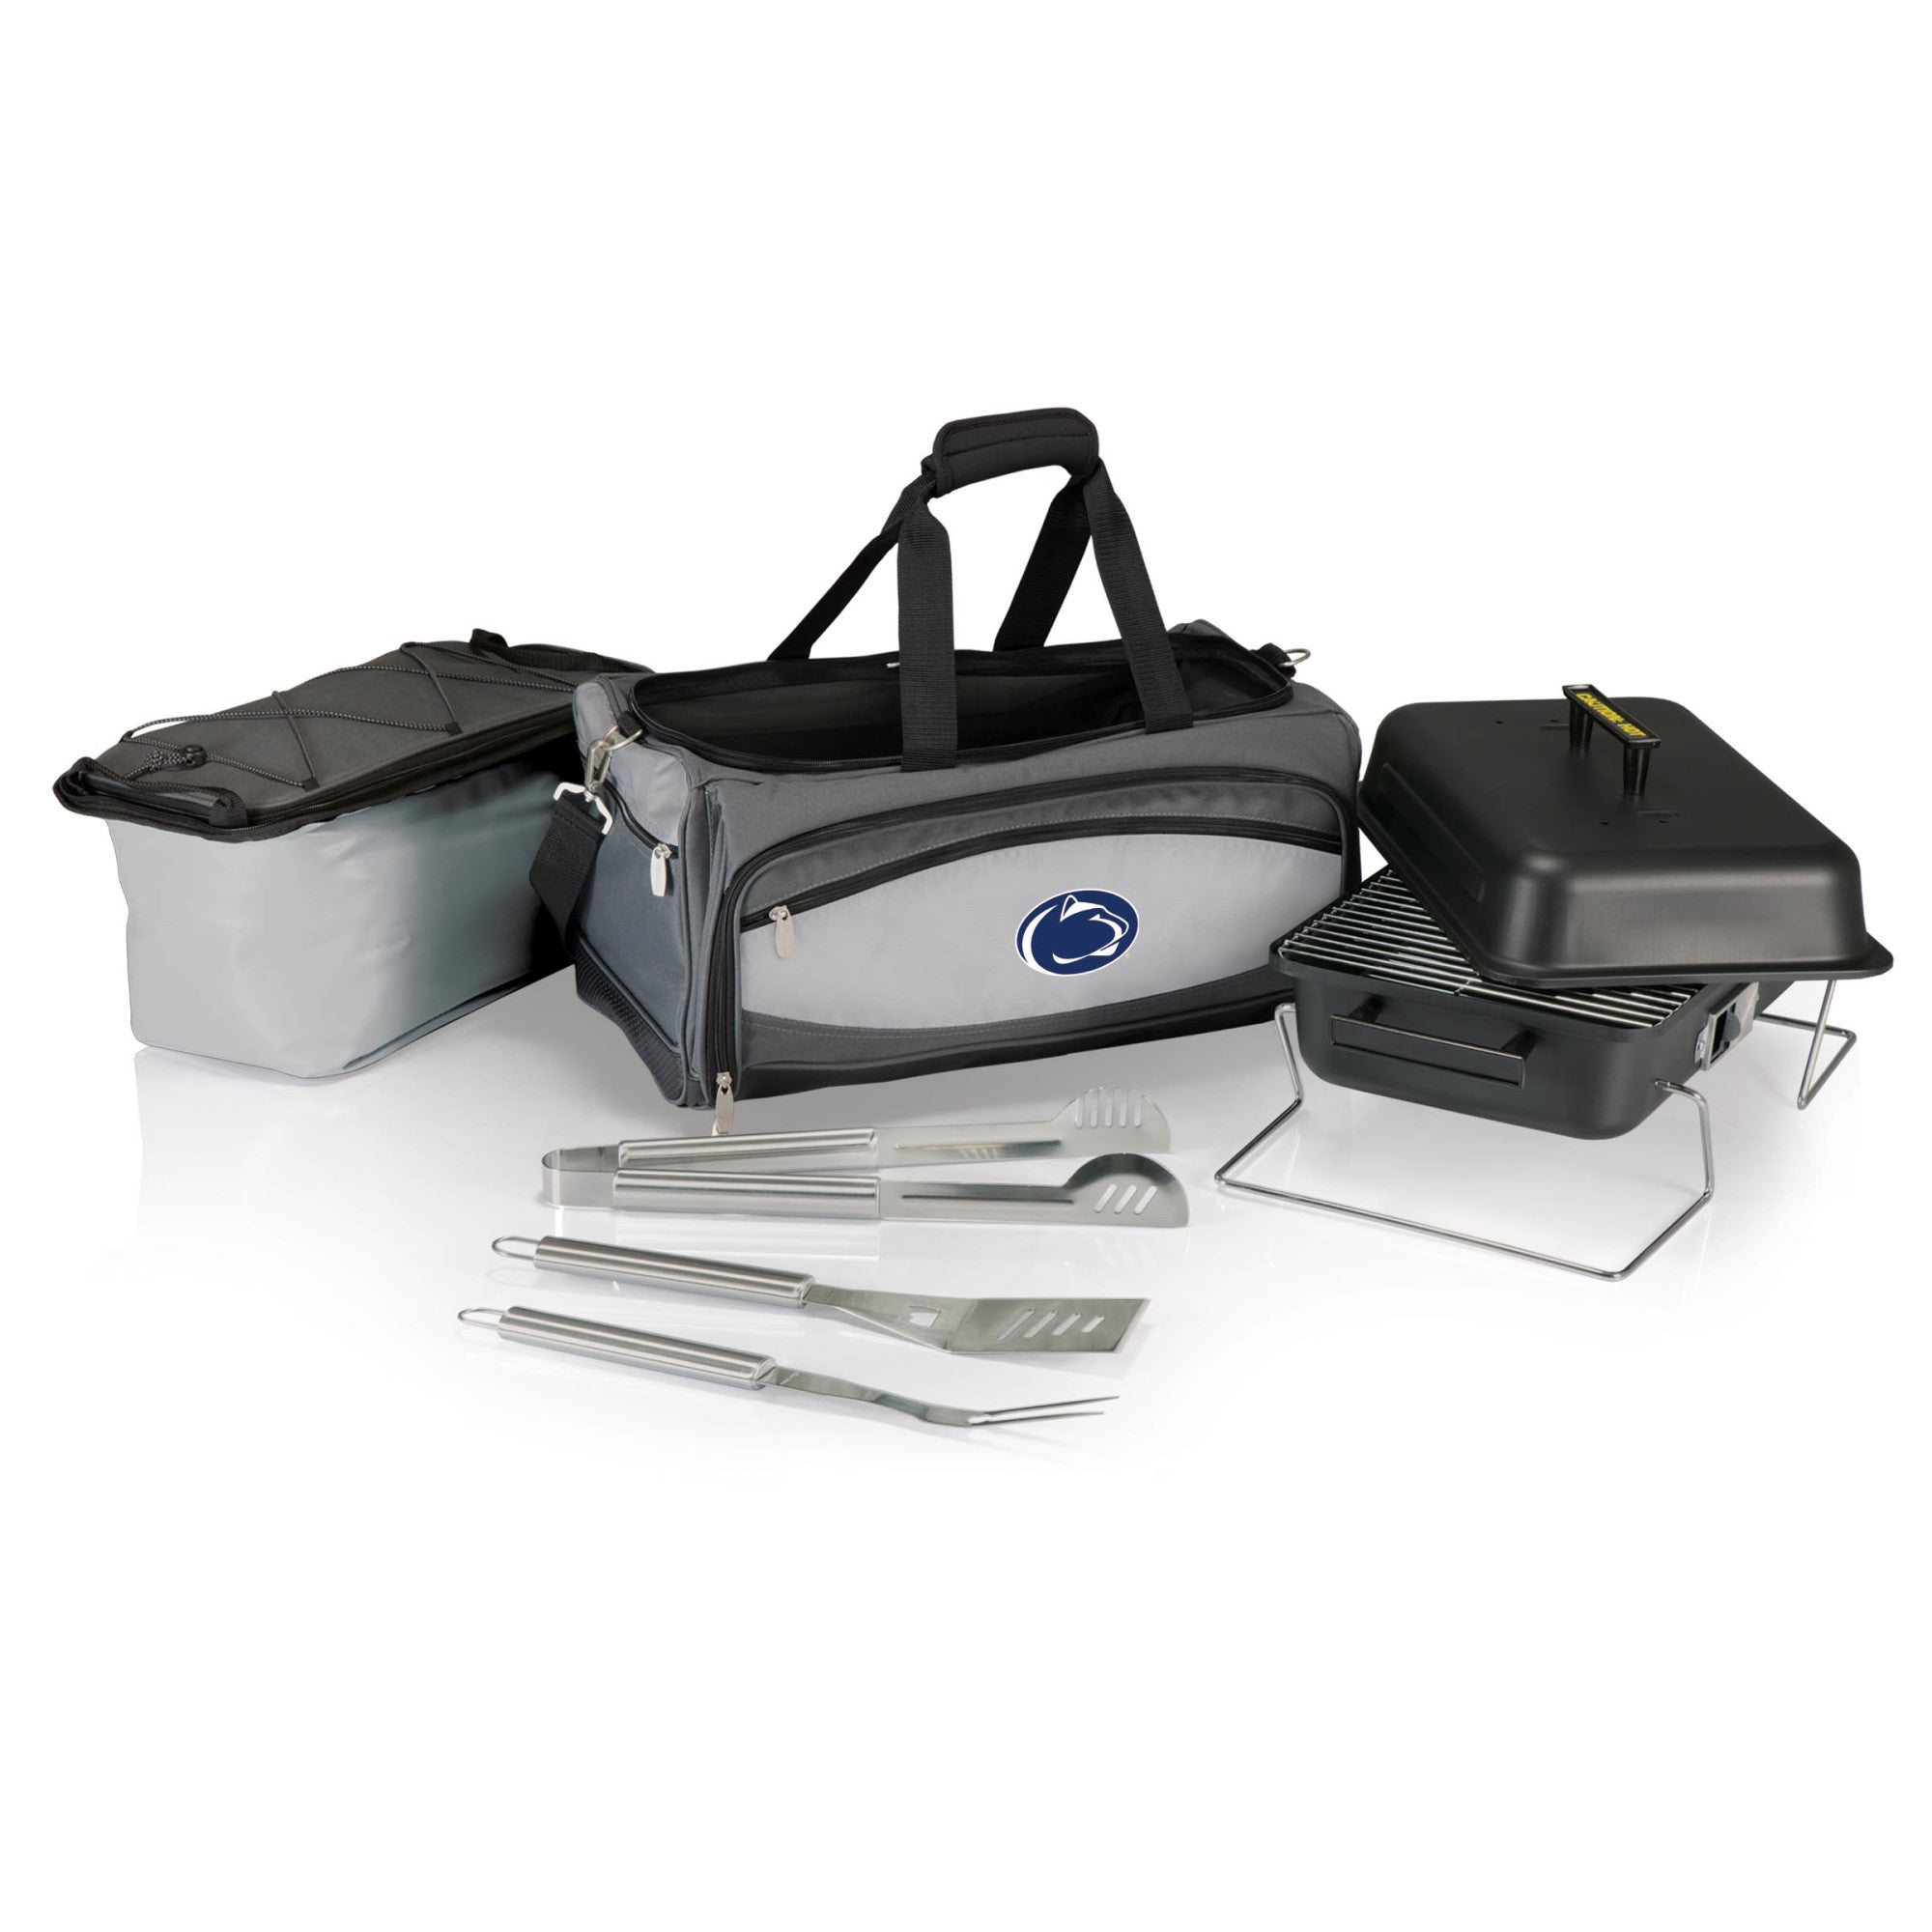 Penn State Nittany Lions - Buccaneer Portable Charcoal Grill & Cooler Tote